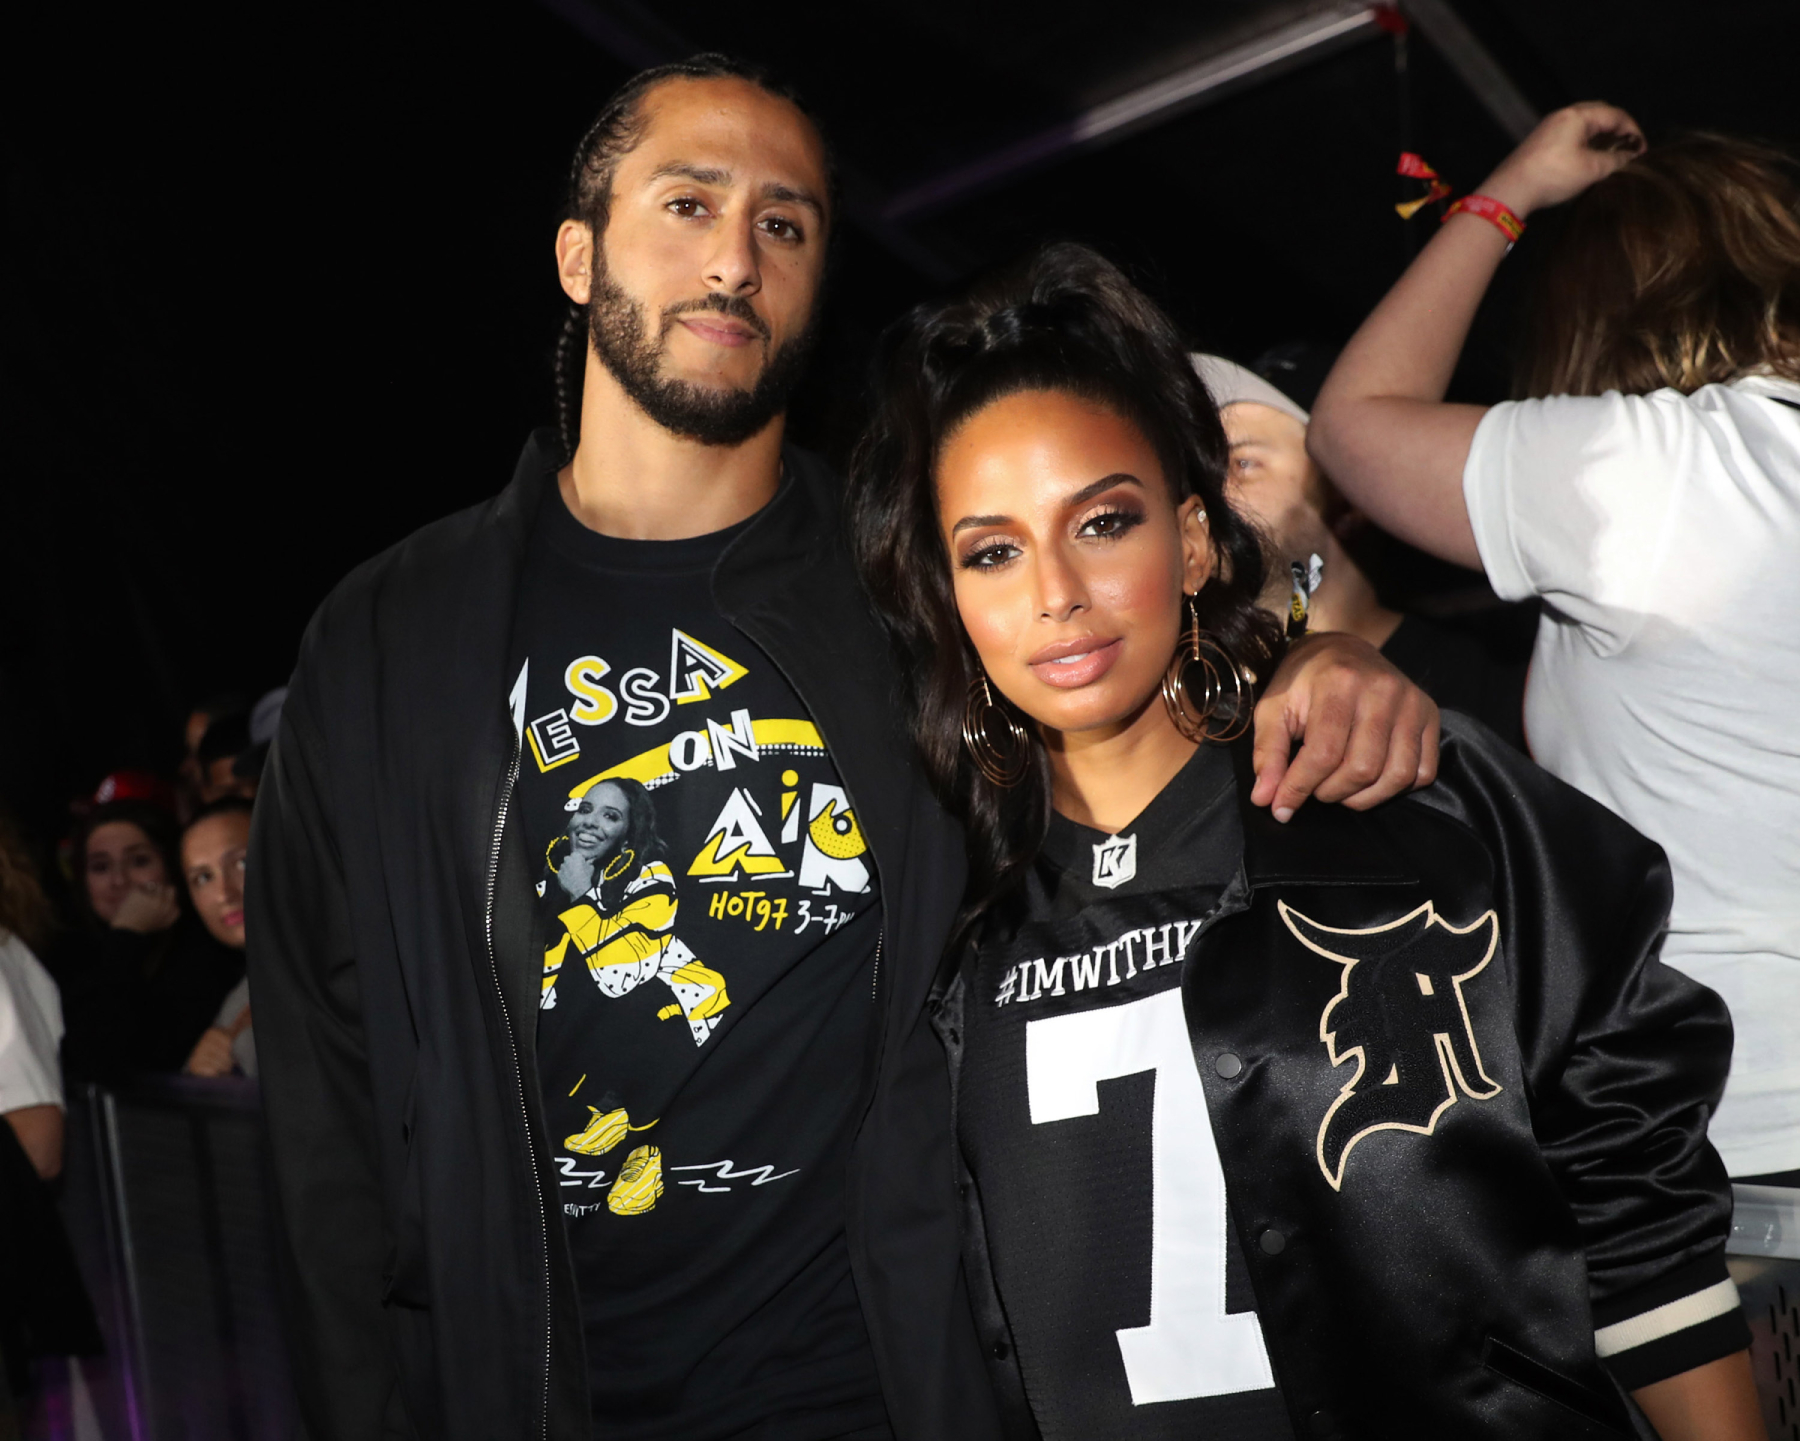 Colin Kaepernick and Eric Reid aren't in the NFL. However, Kaepernick, Reid, and Kaepernick's girlfriend Nessa won't stop fighting.